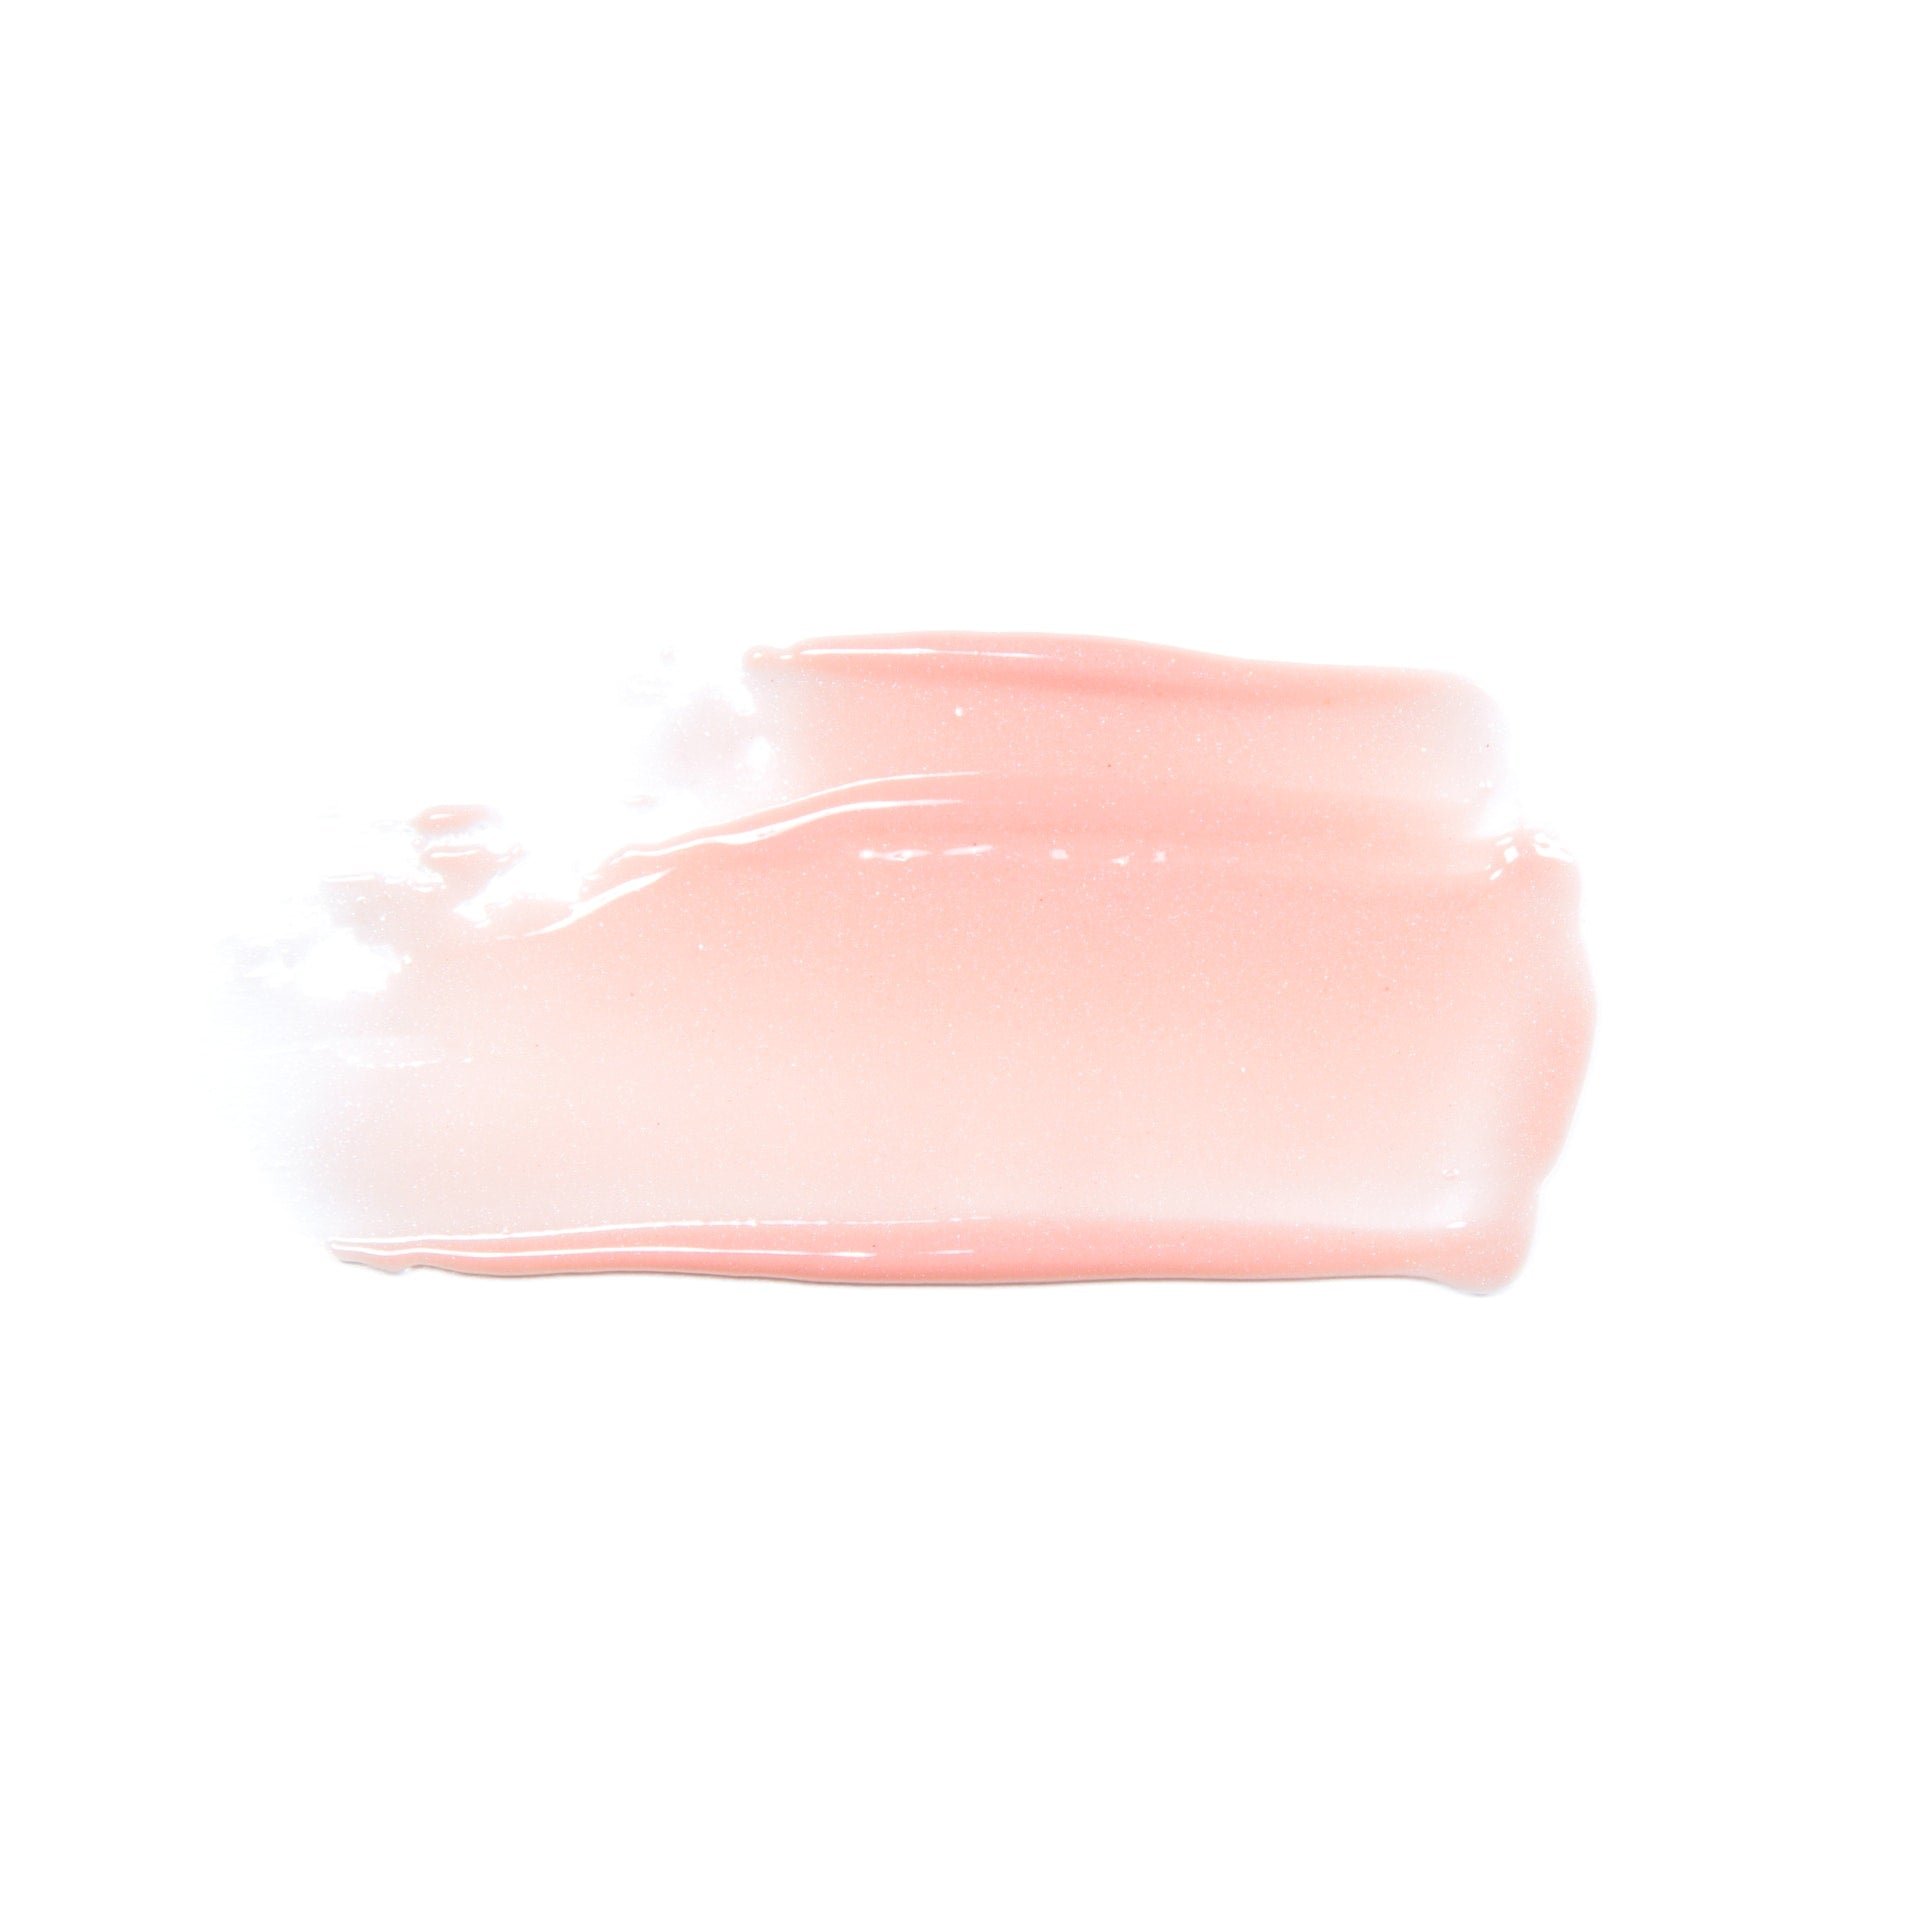 100% PURE Fruit Pigmented Lip Gloss naked